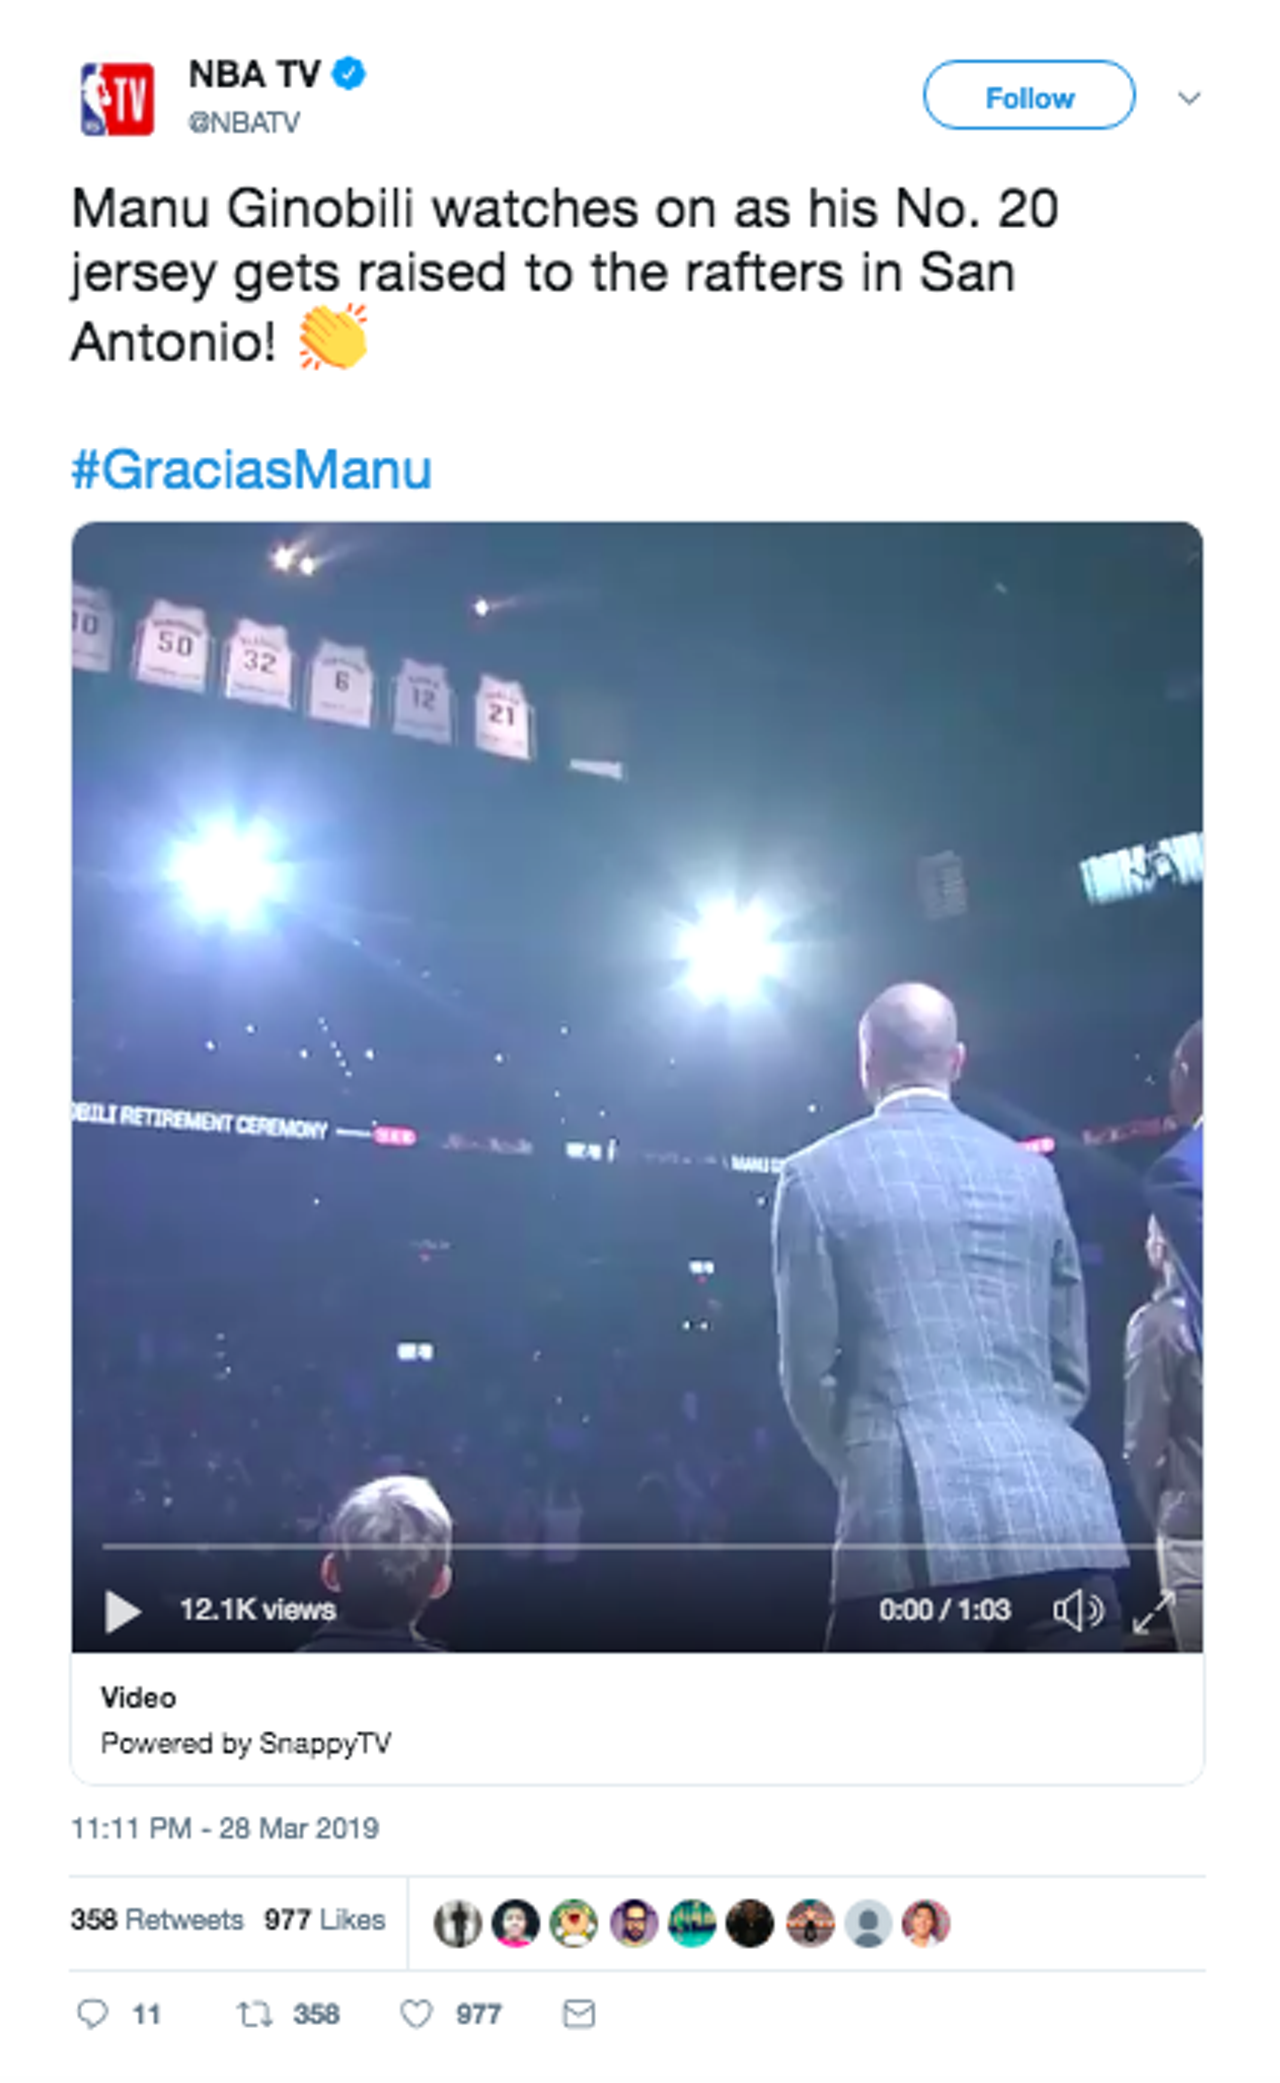 The actual moment Manu's jersey was revealed – and seeing Manu witness the historic moment
Source